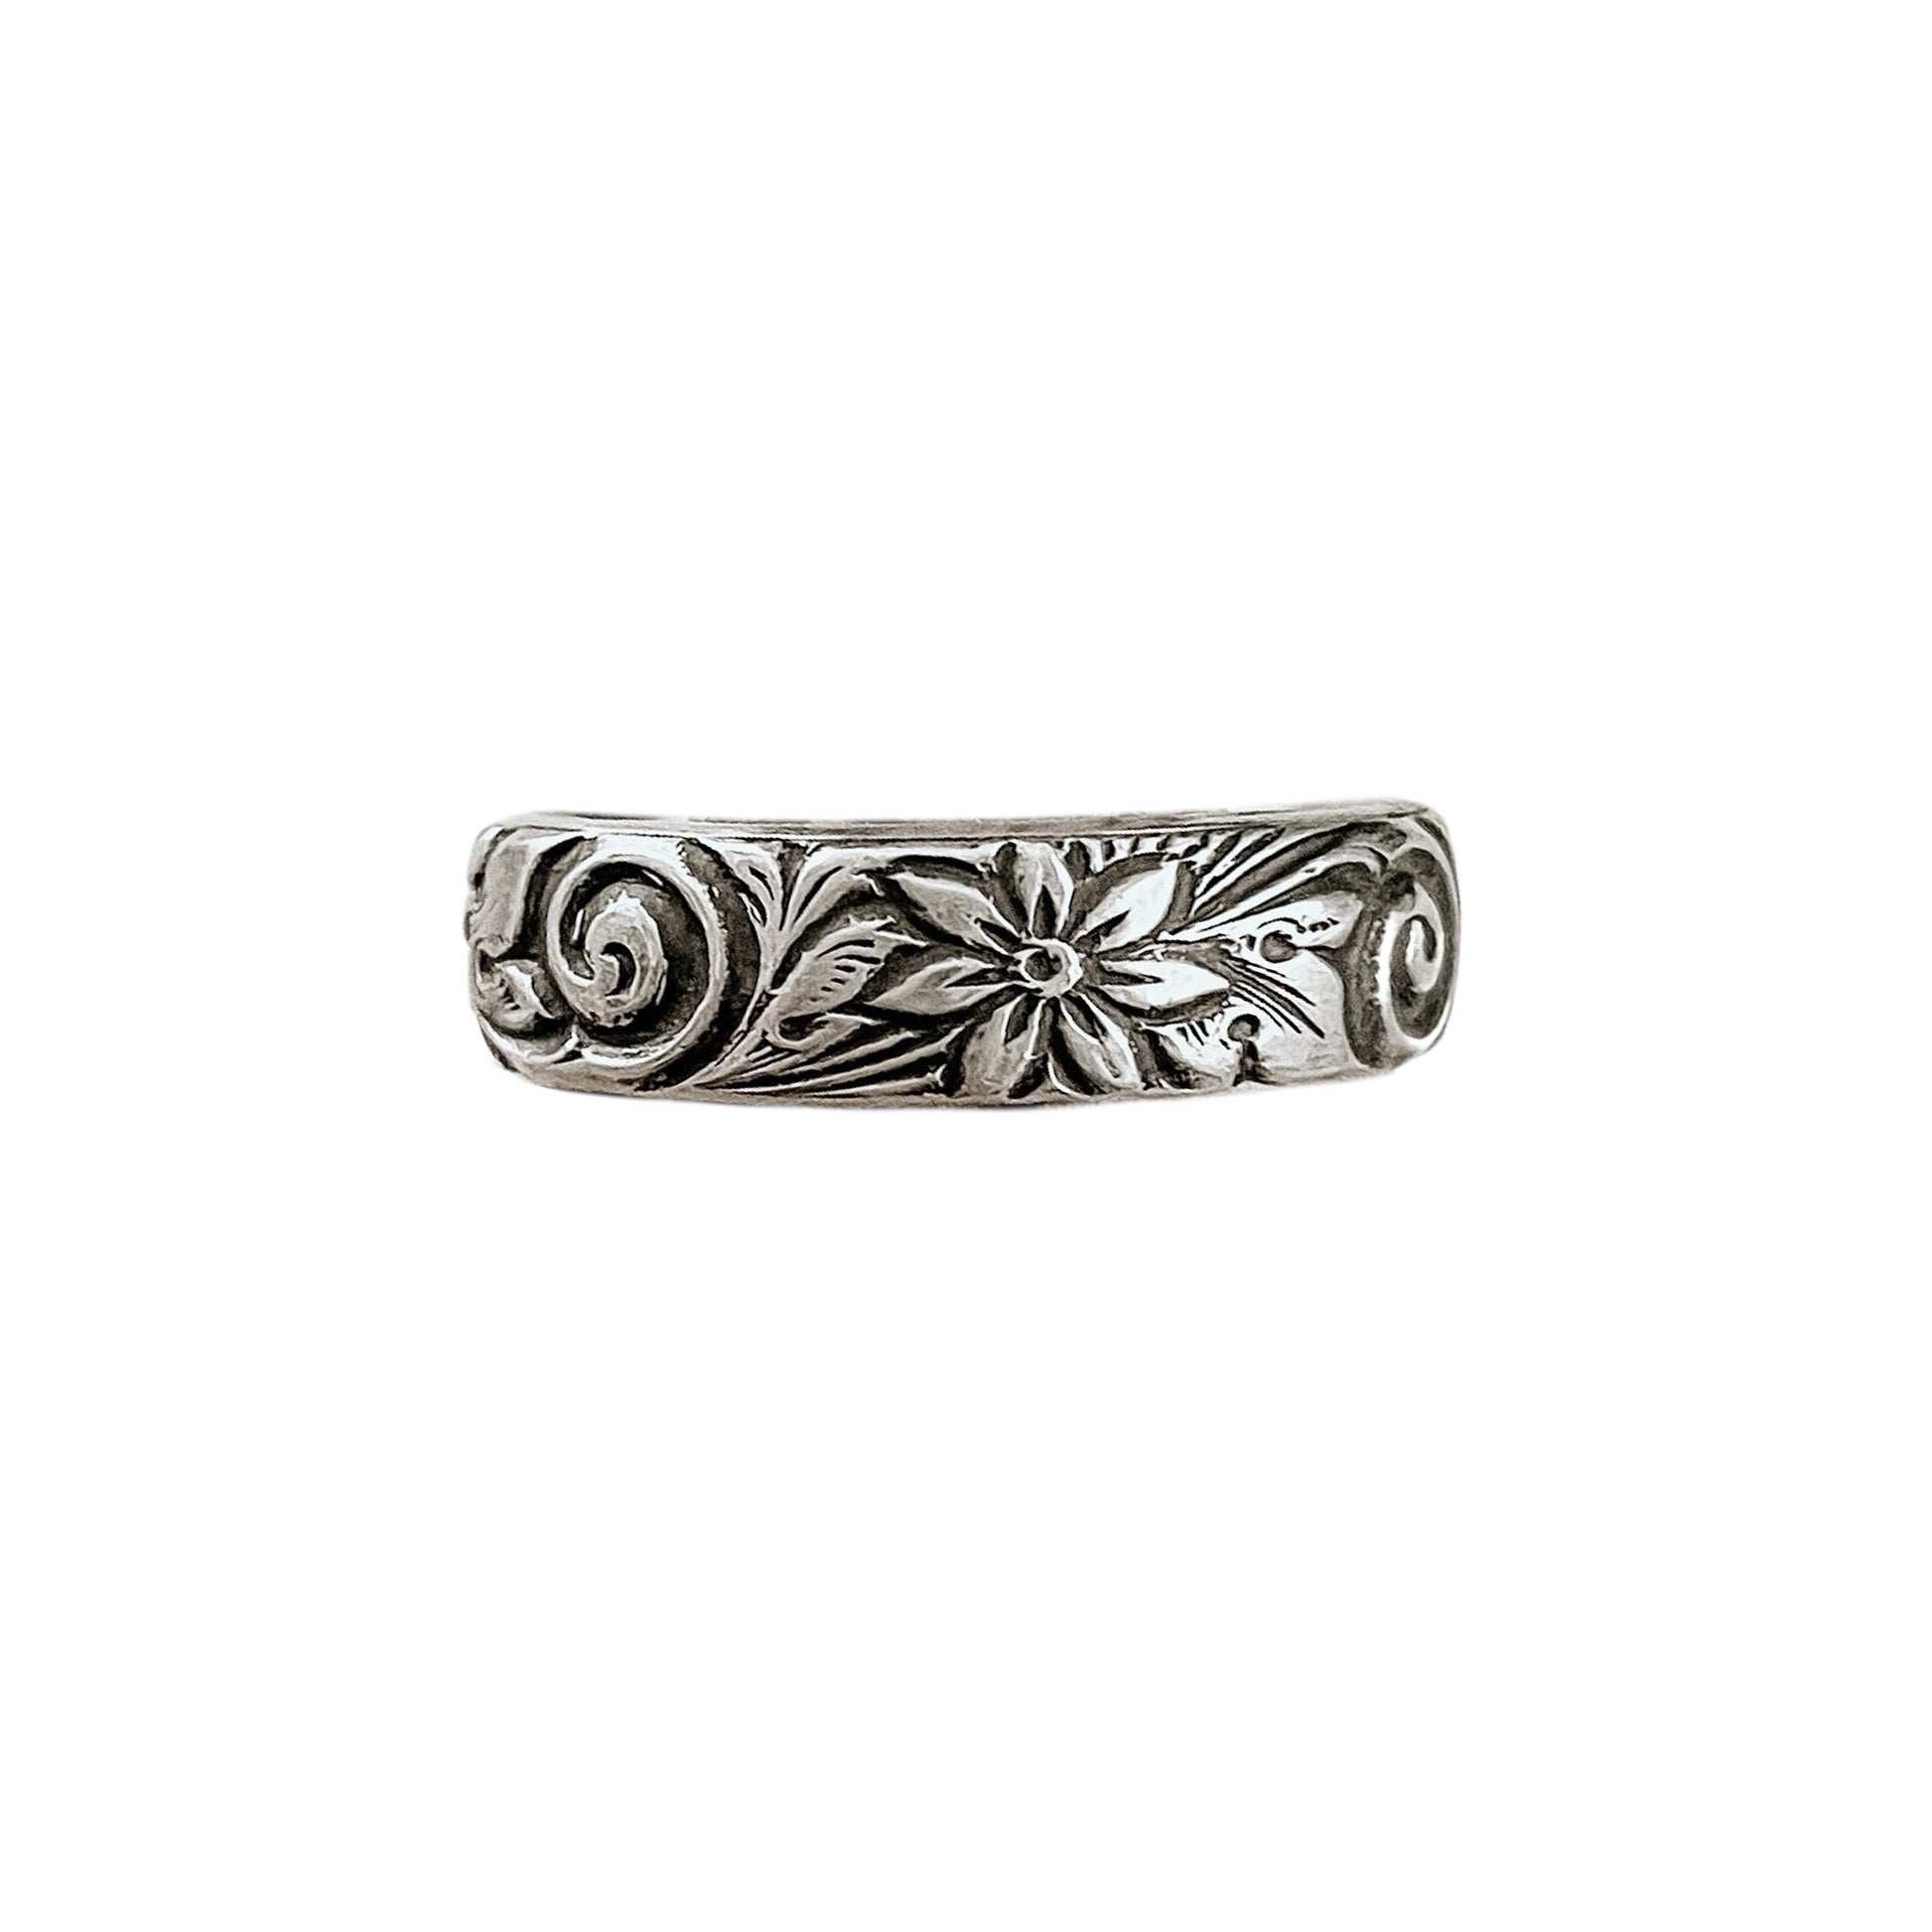 Floral Swirl Boho Ring shown in antiqued finish for a true vintage appearance.